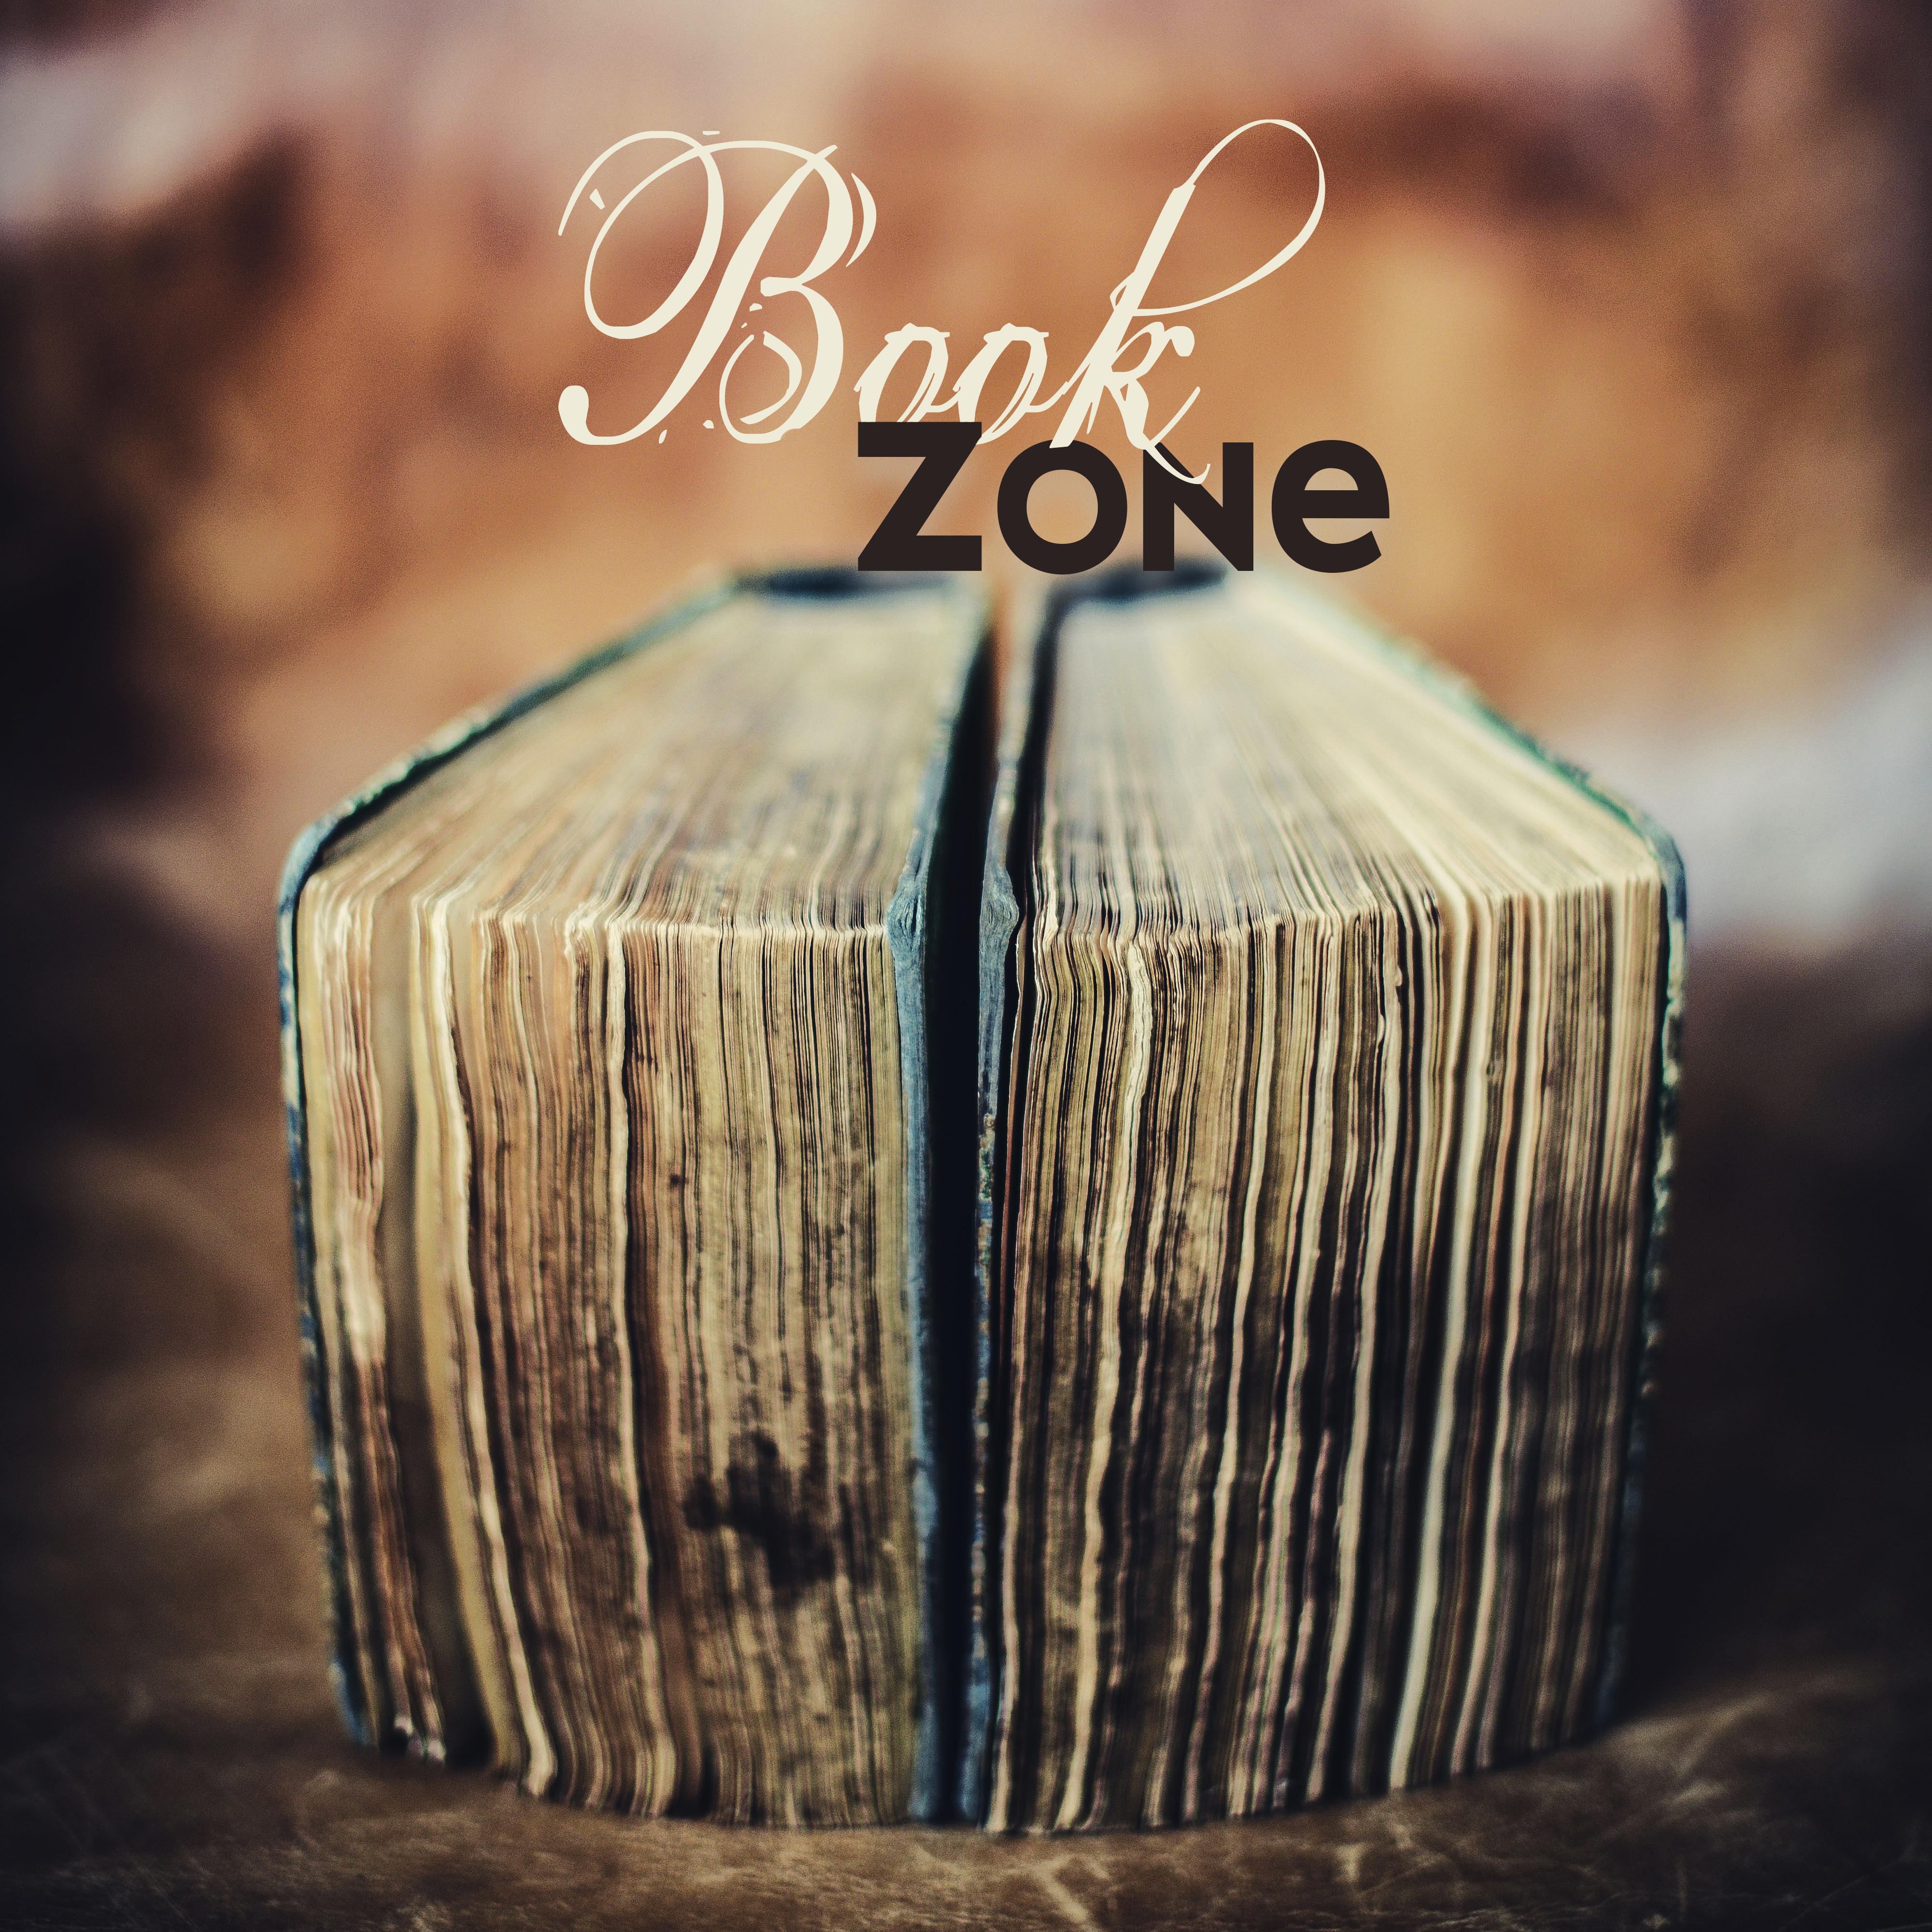 Book Zone - Music to Read that'll Stimulate Your Imagination and Take You to Another World